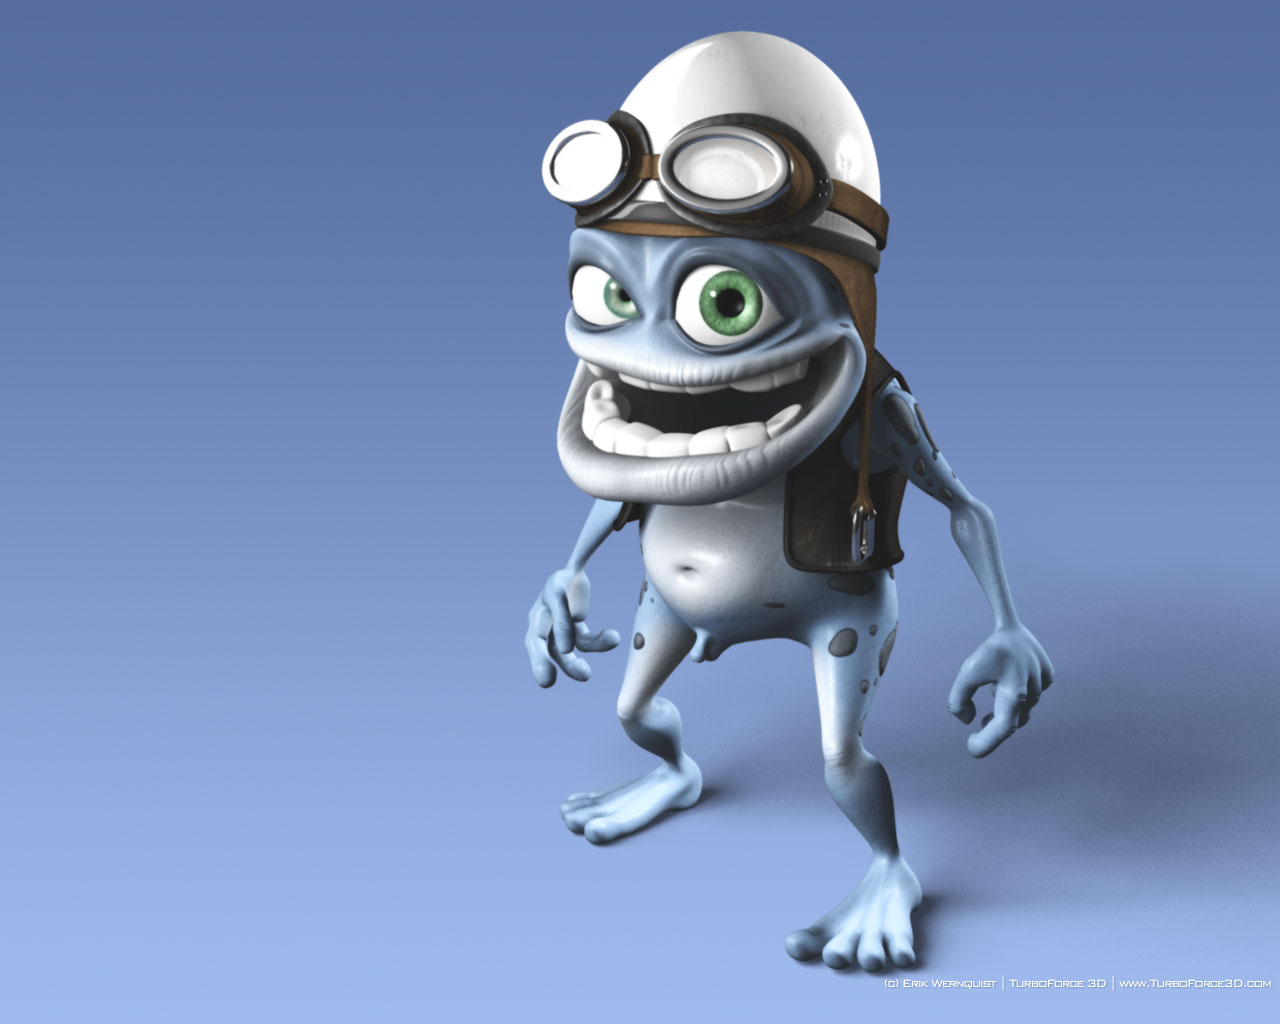 Movie Crazy Frog Wallpaper Also The